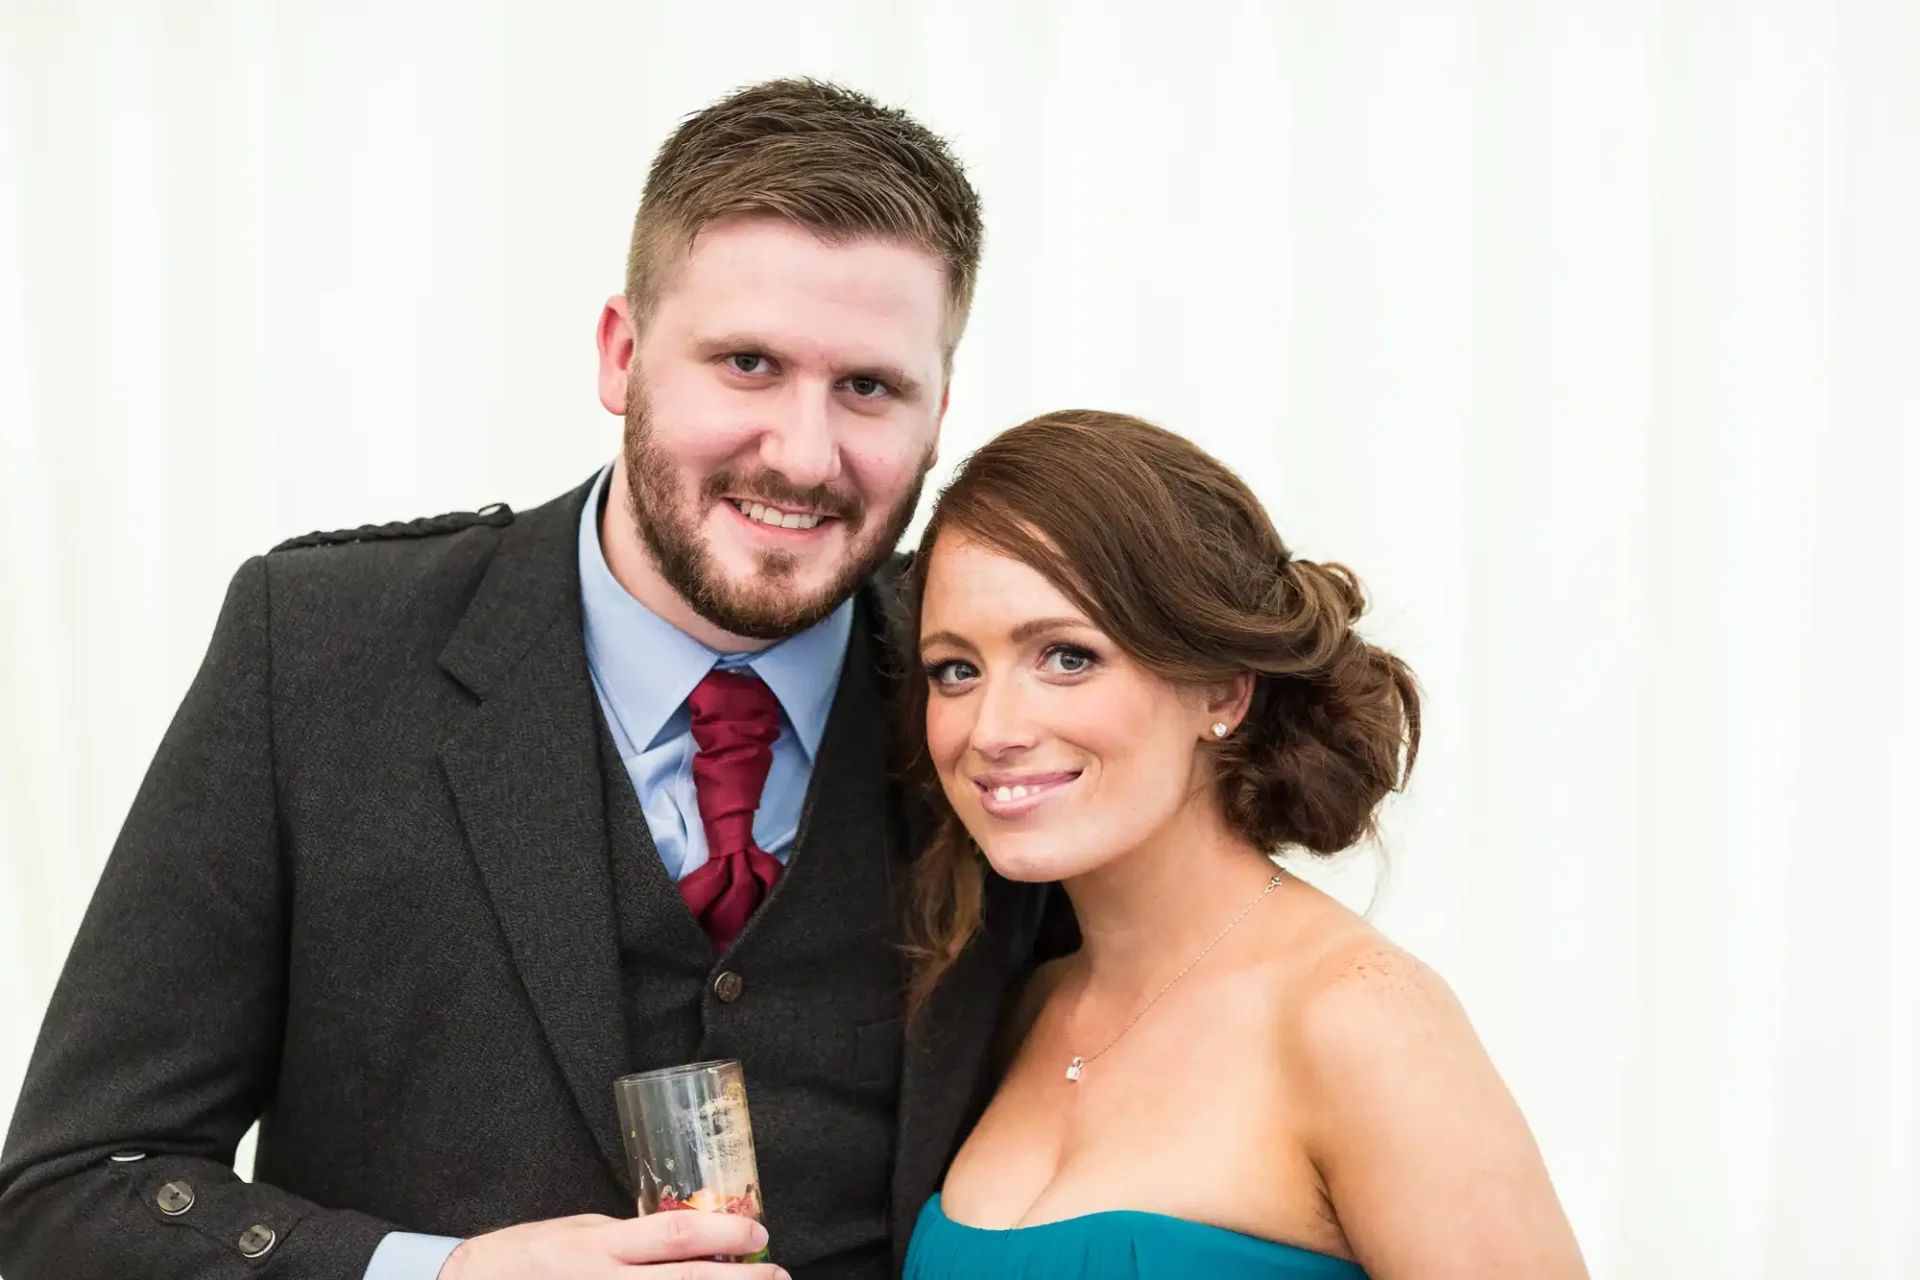 A man and a woman smiling at the camera, the man in a gray suit with a red tie and the woman in a teal dress, both holding a glass.